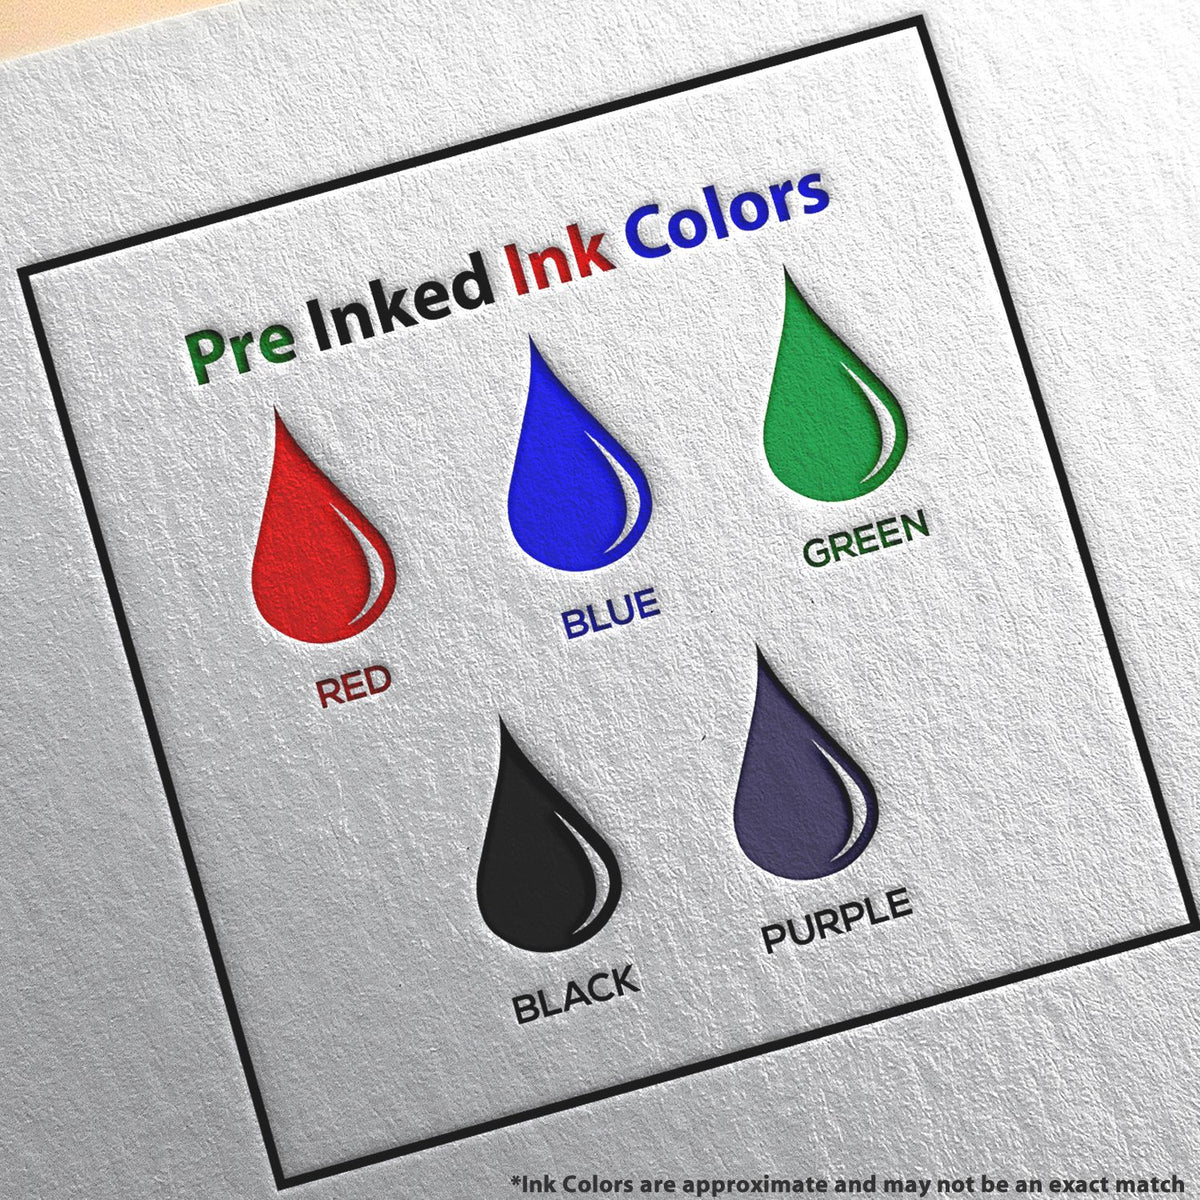 A picture showing the different ink colors or hues available for the Premium MaxLight Pre-Inked Idaho Engineering Stamp product.